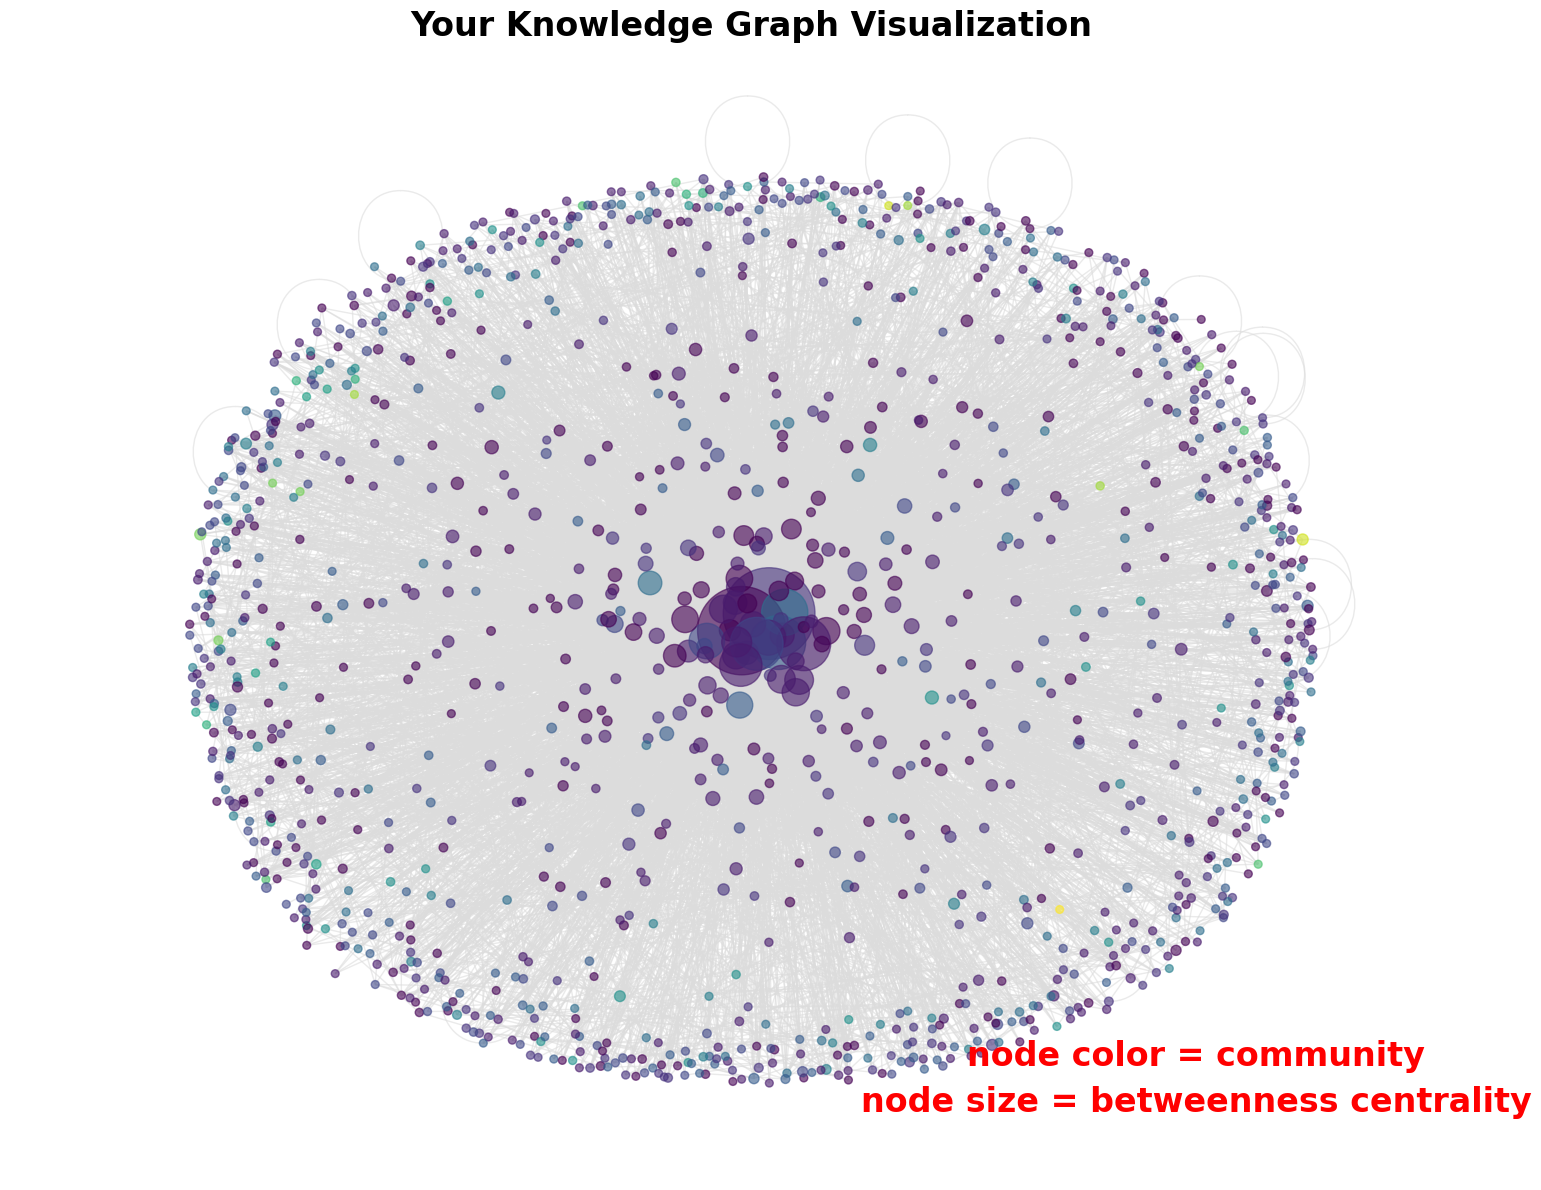 Betweenness centrality and community detection in the knowledge graph